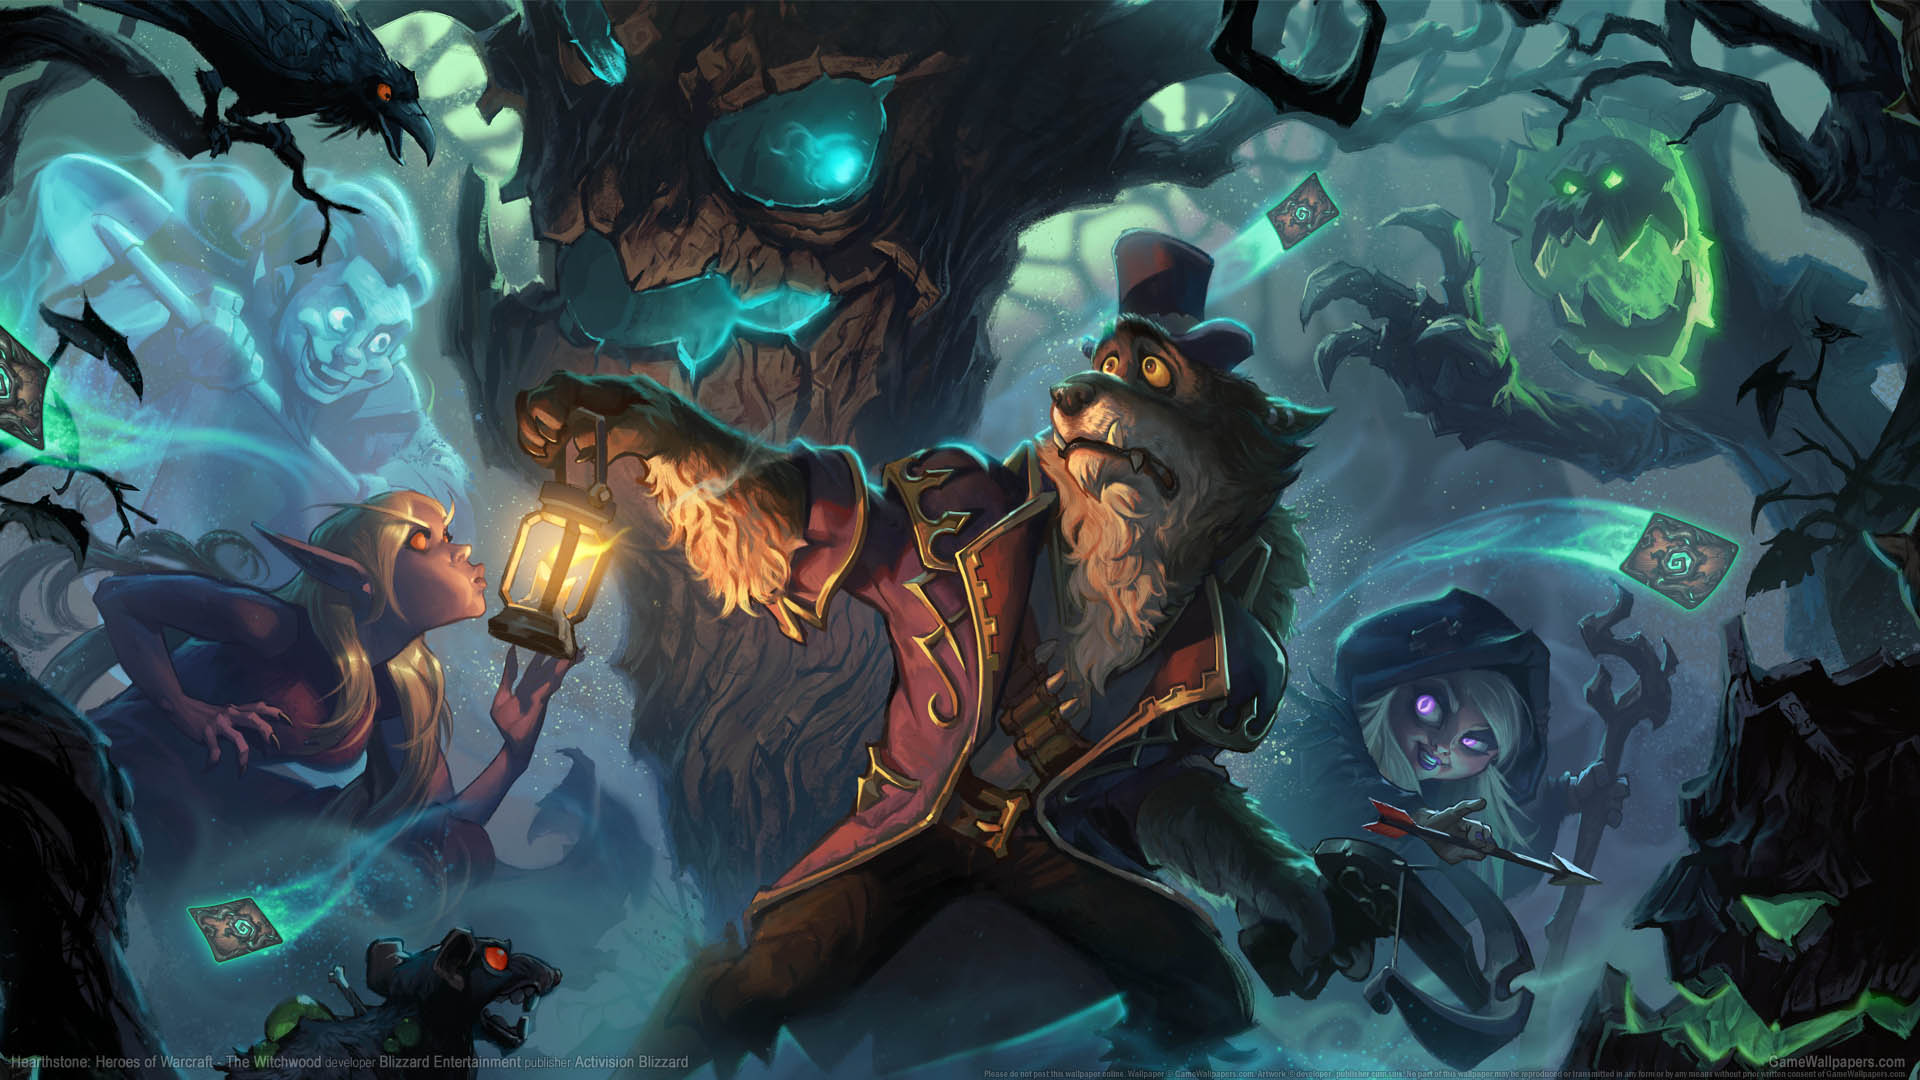 Hearthstone: Heroes of Warcraft - The Witchwood achtergrond 01 1920x1080